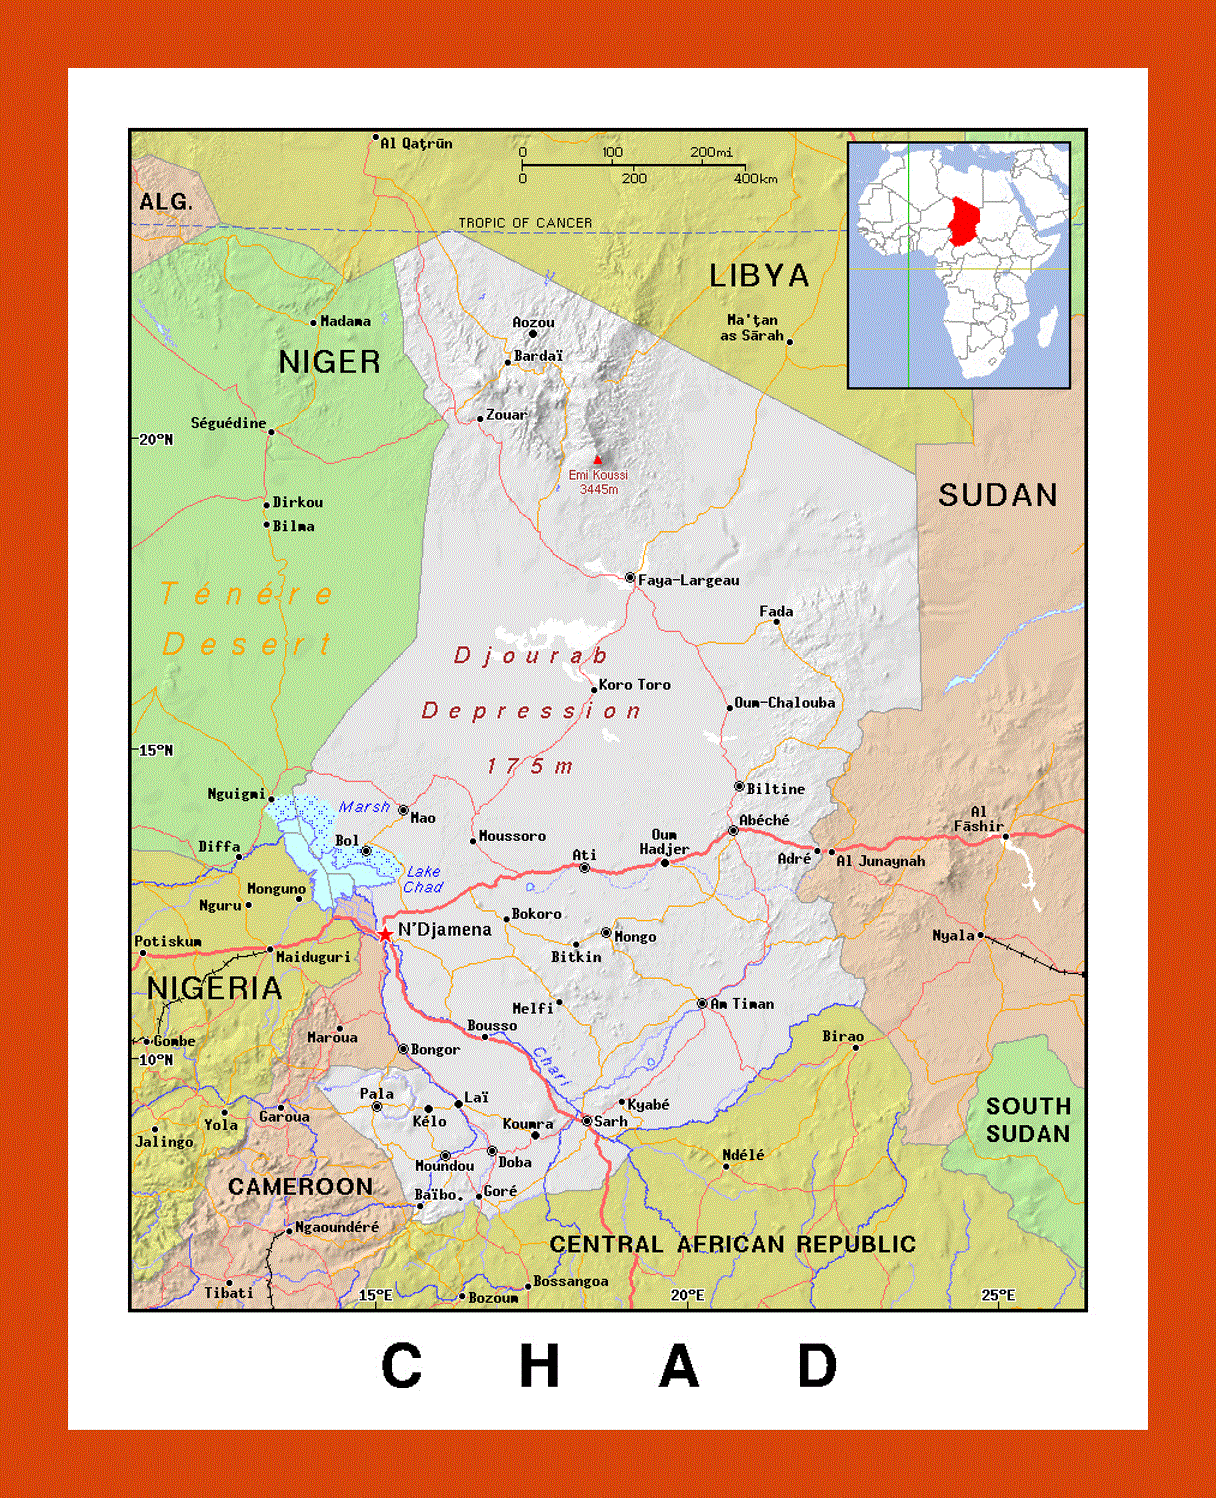 Political map of Chad